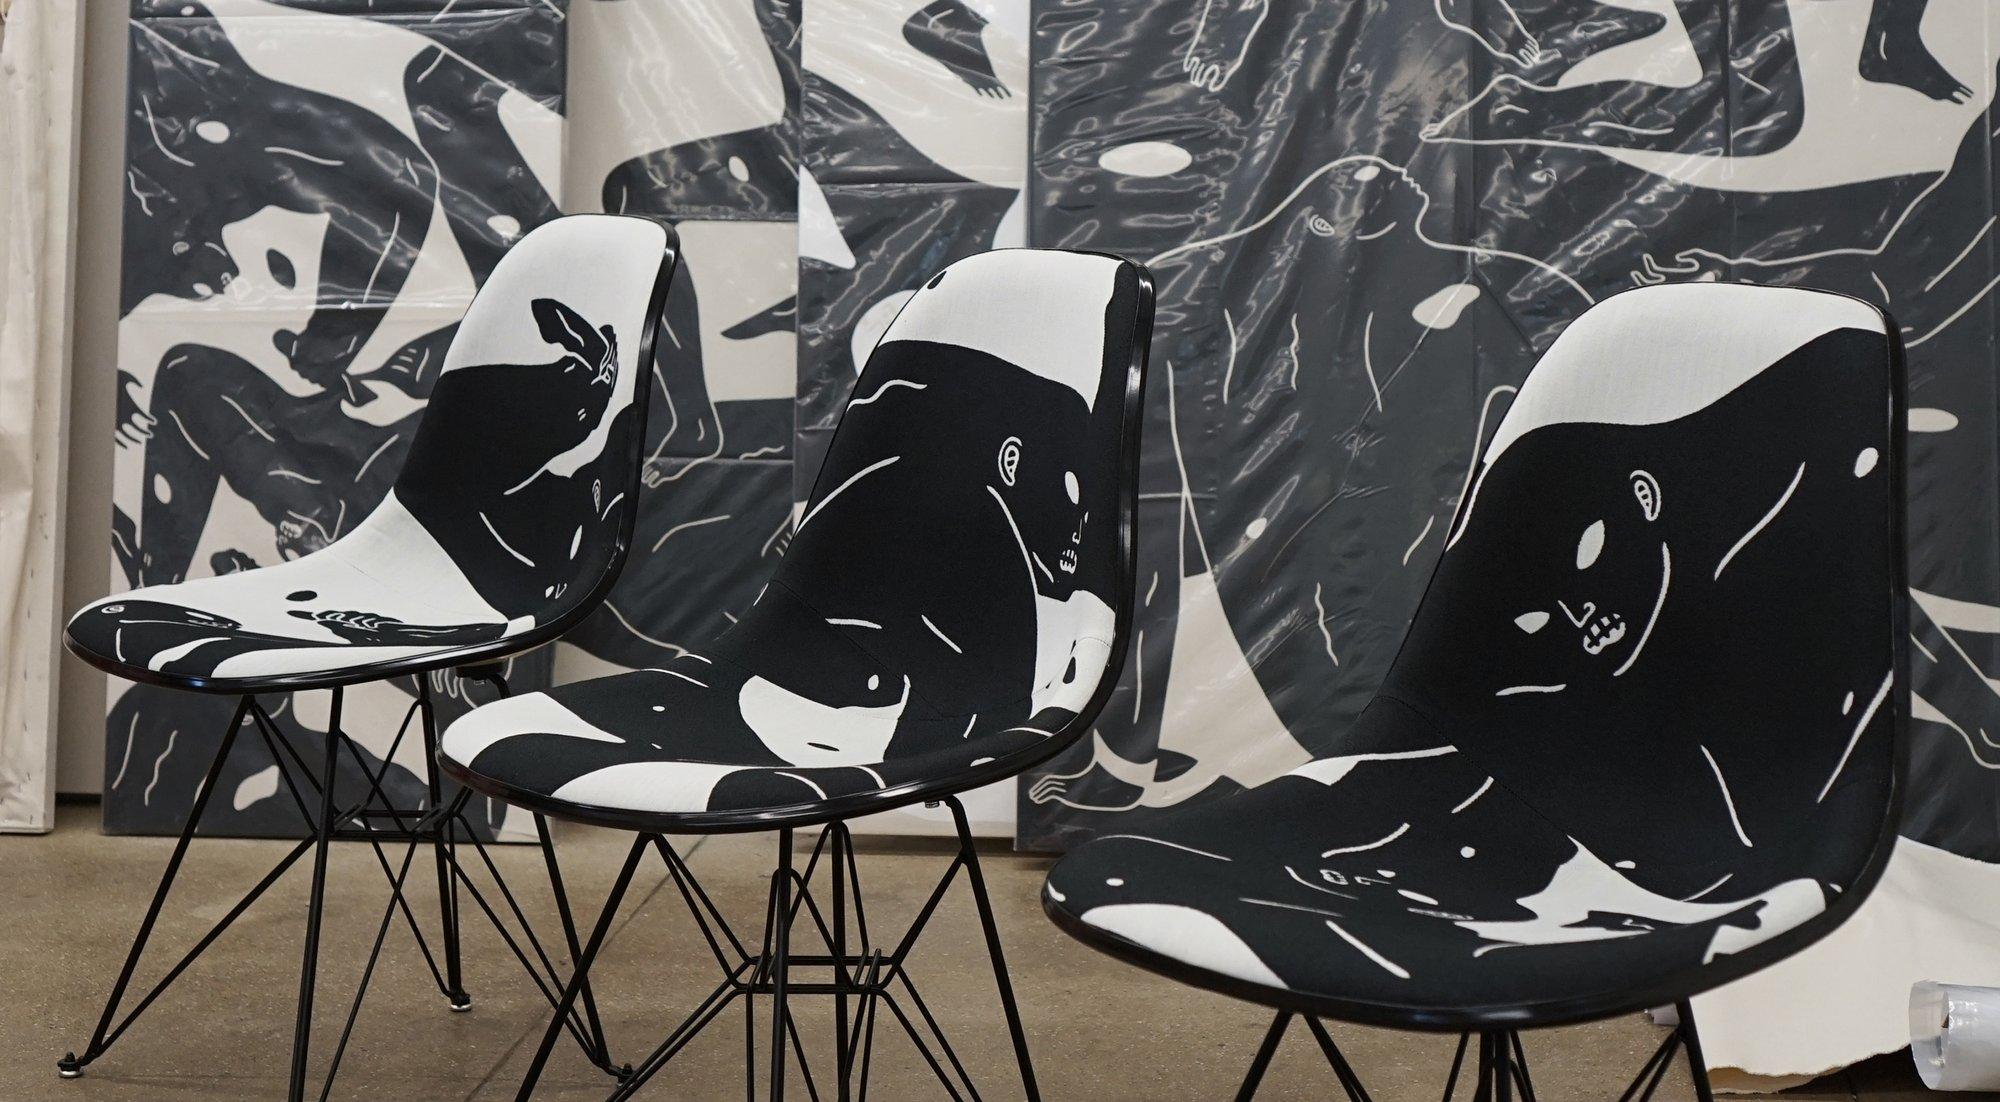 Museum of Contemporary Art Denver X Modernica Full Set of 3 Chairs Henry Eames - Black Abstract Sculpture by Cleon Peterson